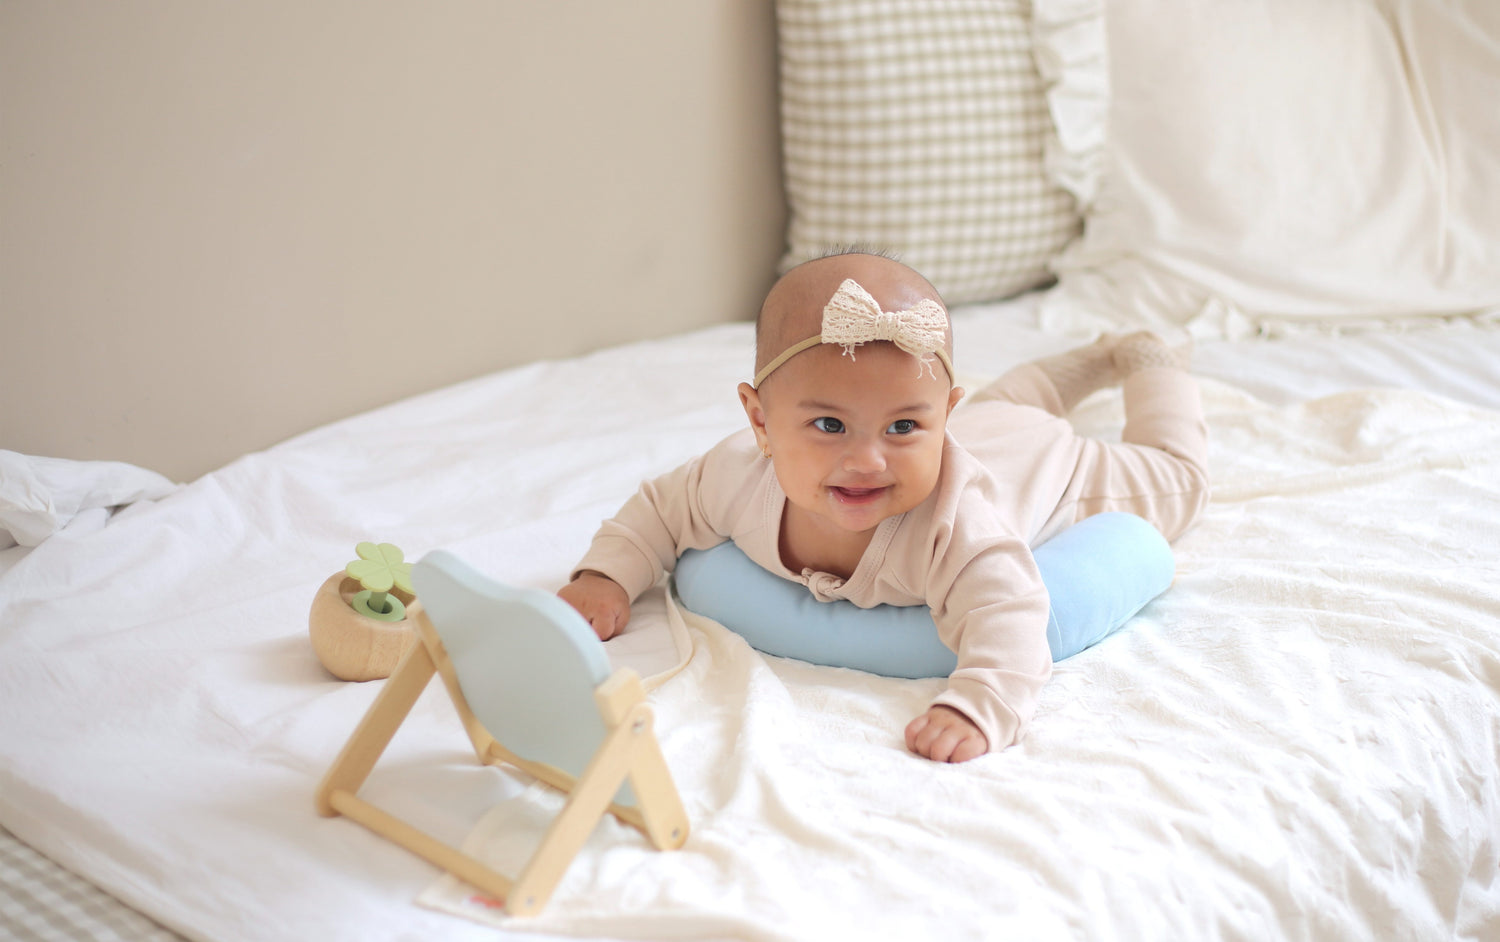 Baby smiling during tummy time while using the Tummy Time Pillow and Tummy Time Stand